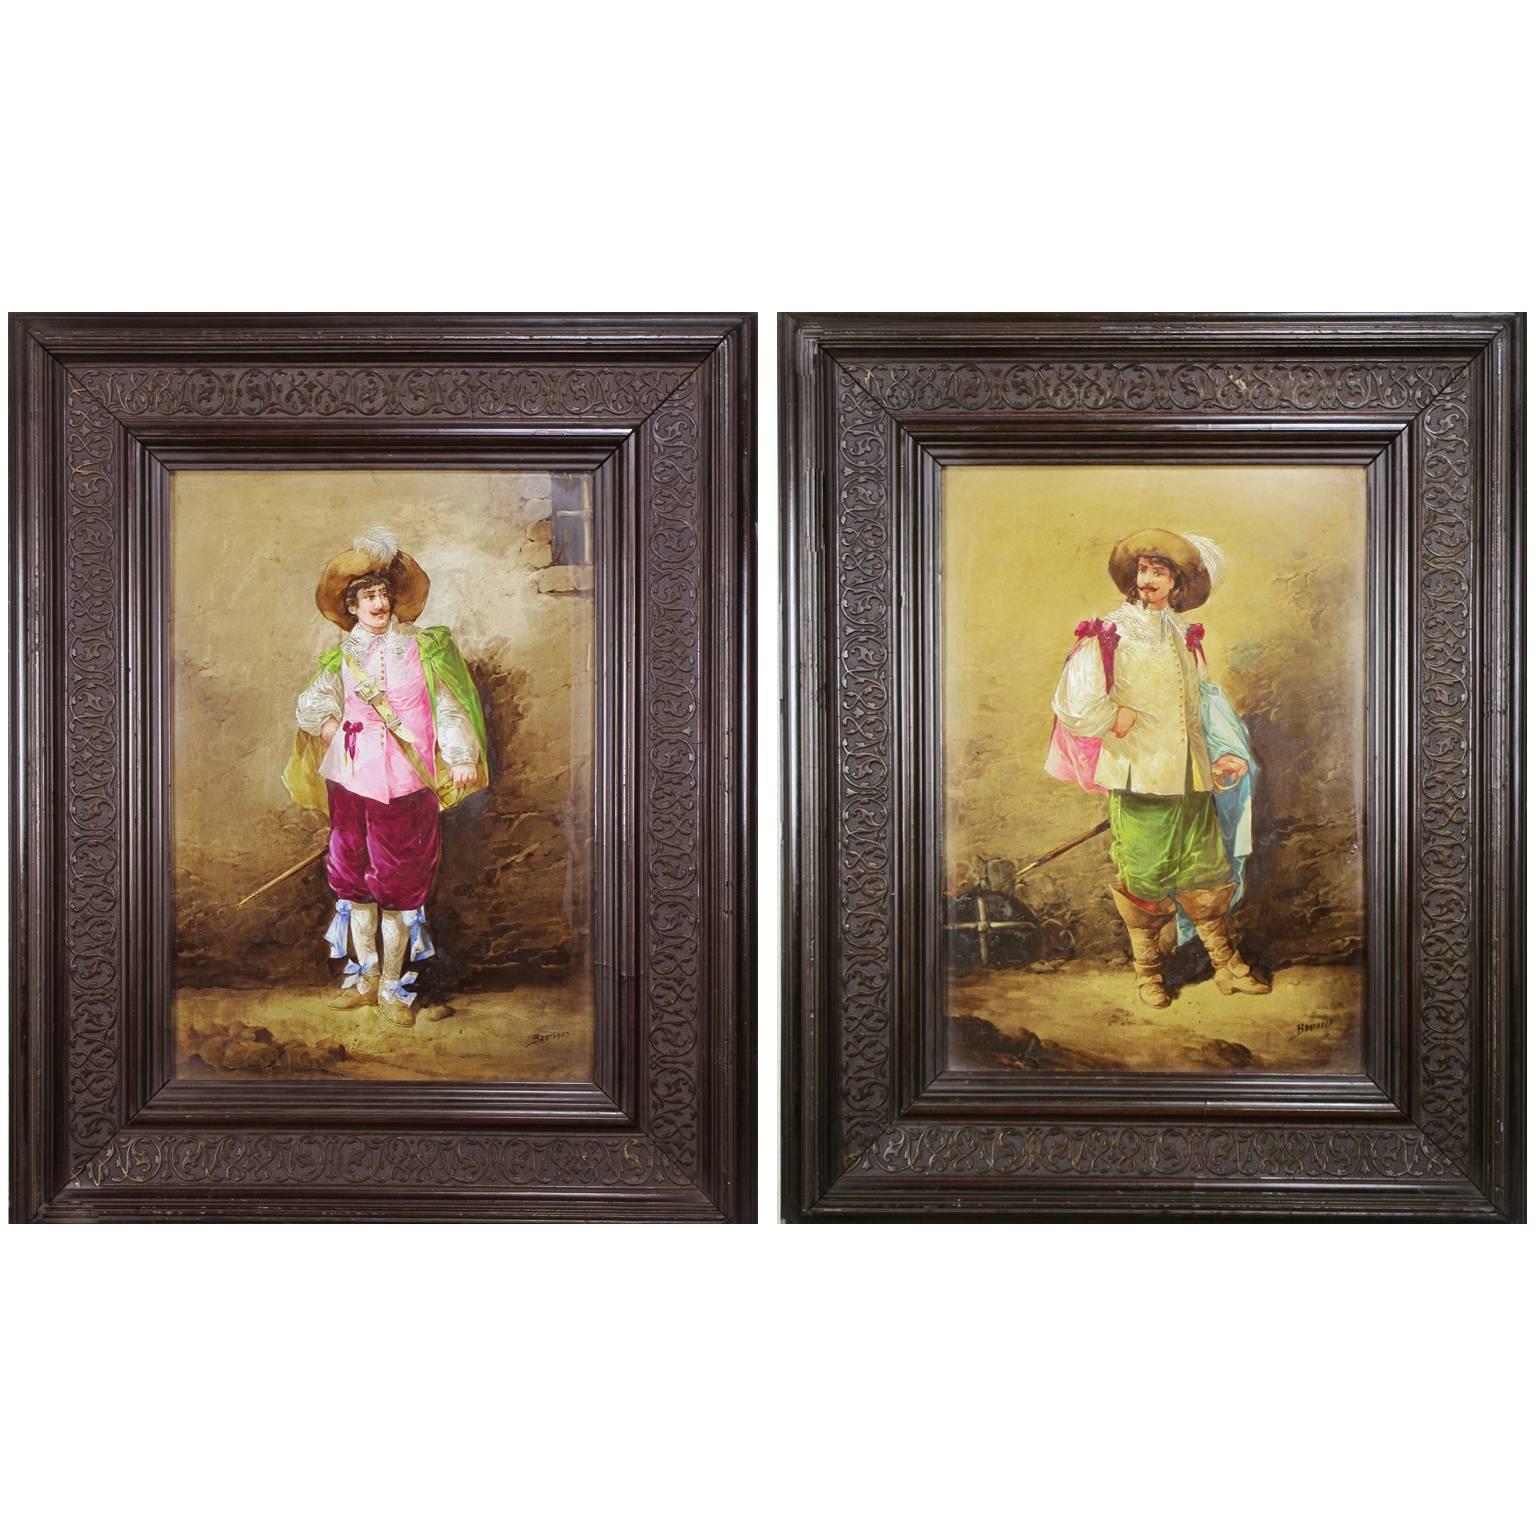 Pair of French Porcelain Plaques of Musketeers by Leon Berthaud